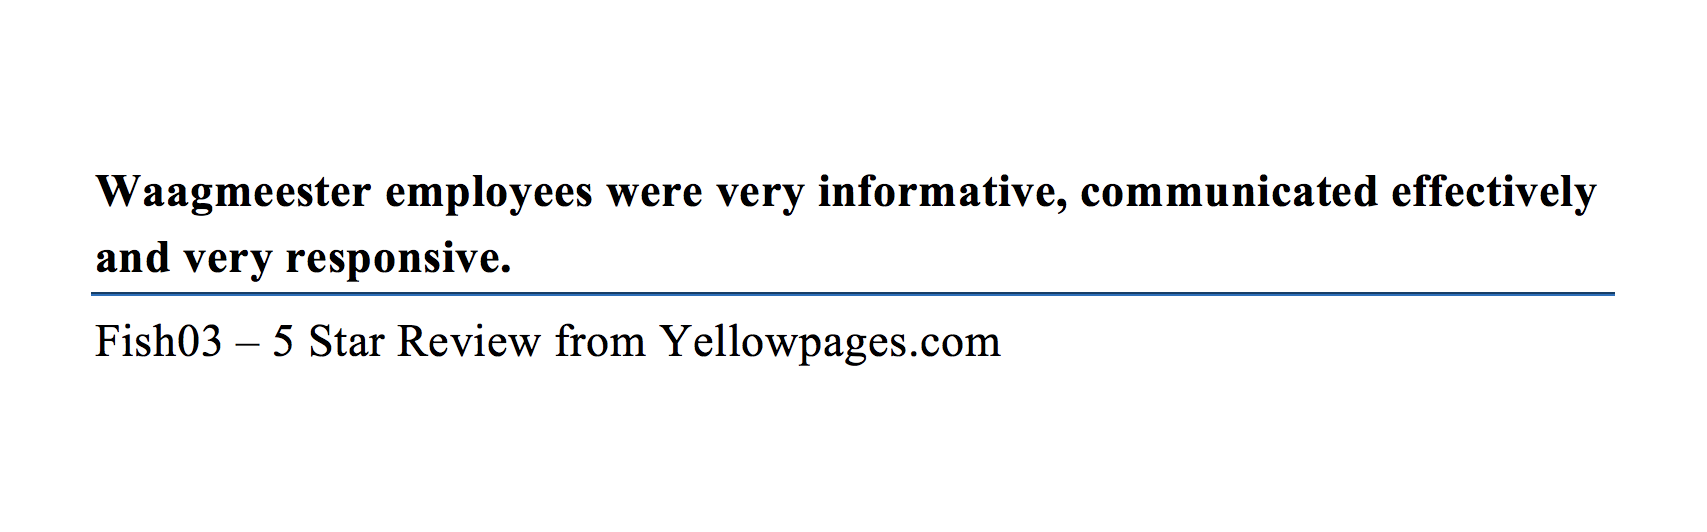 Yellow Pages 5 Star Review